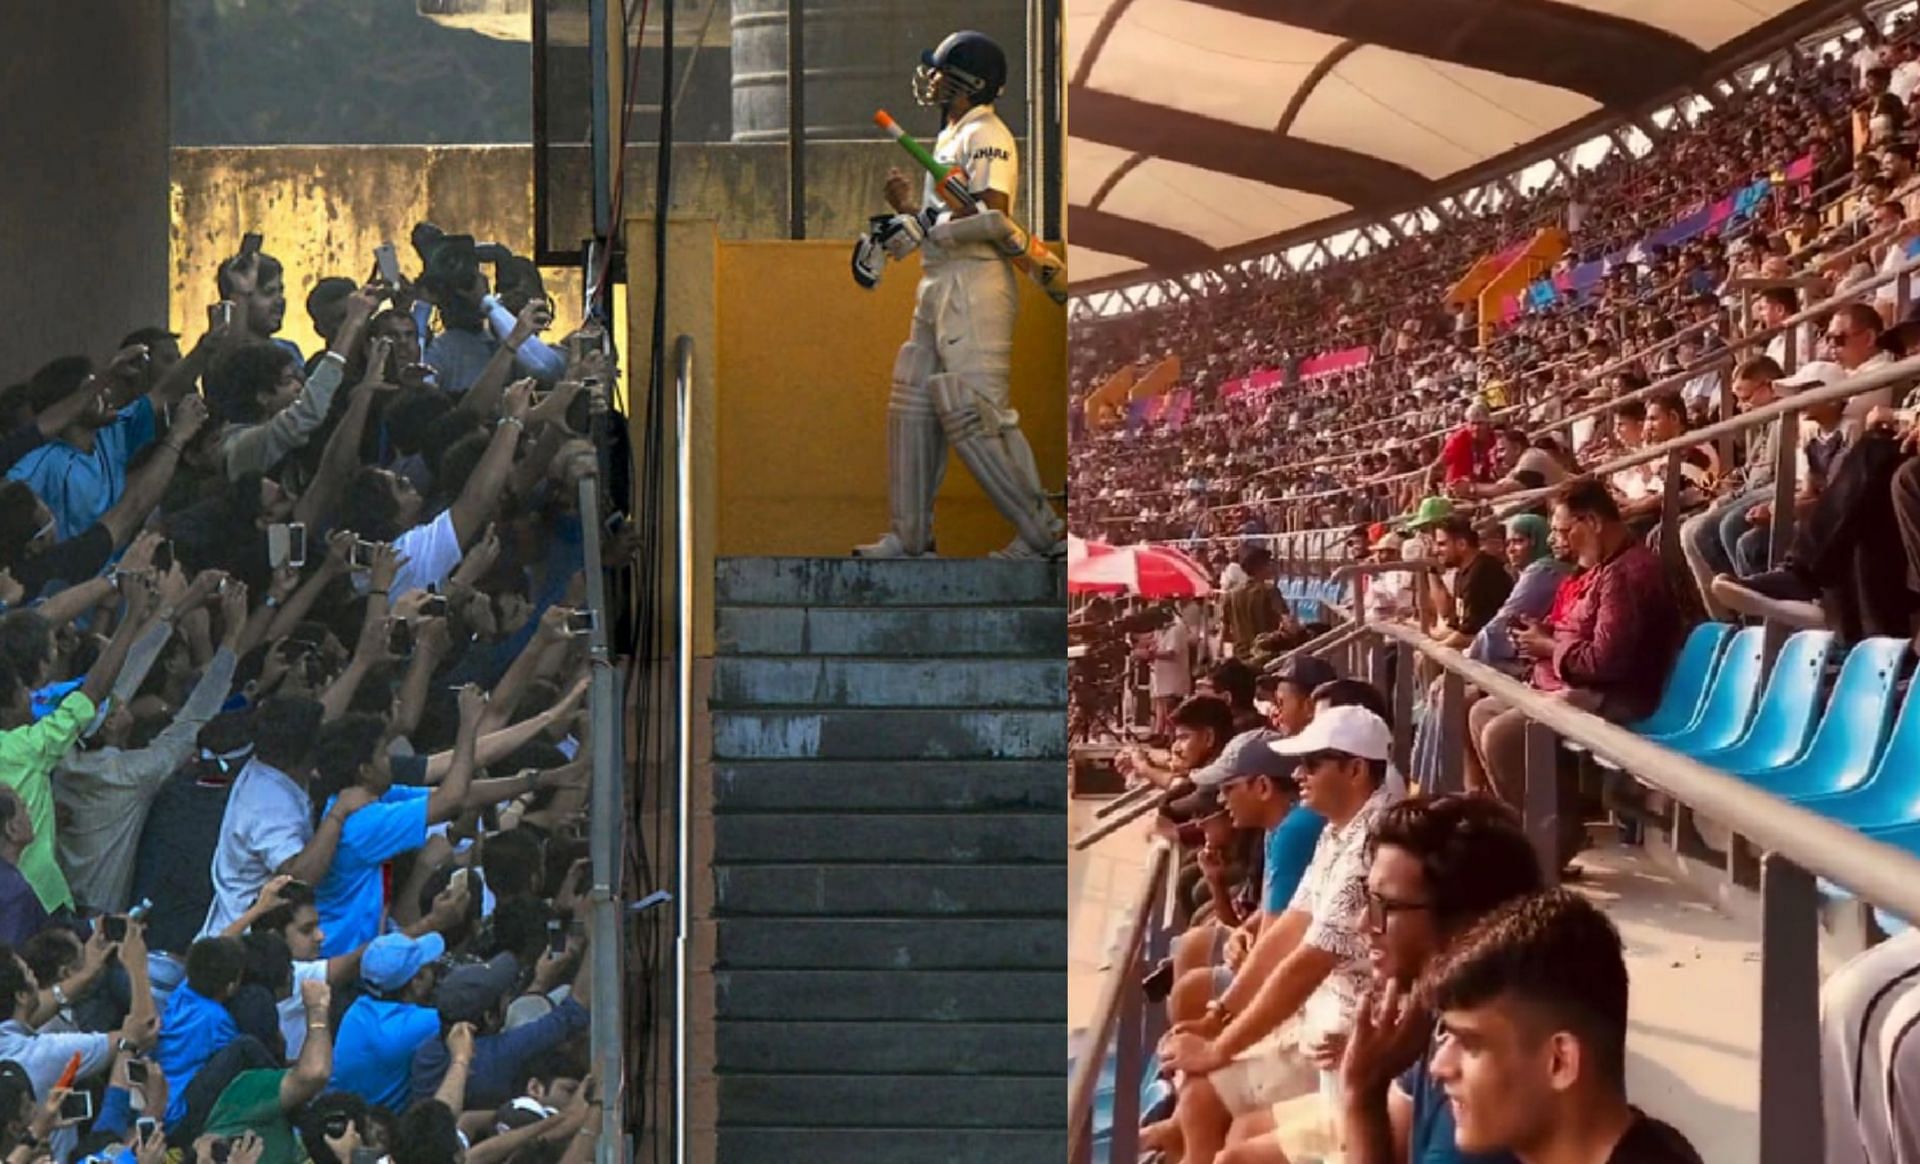 Sachin Tendulkar retired from International cricket with his last match at Wankhede Stadium in 2013. 